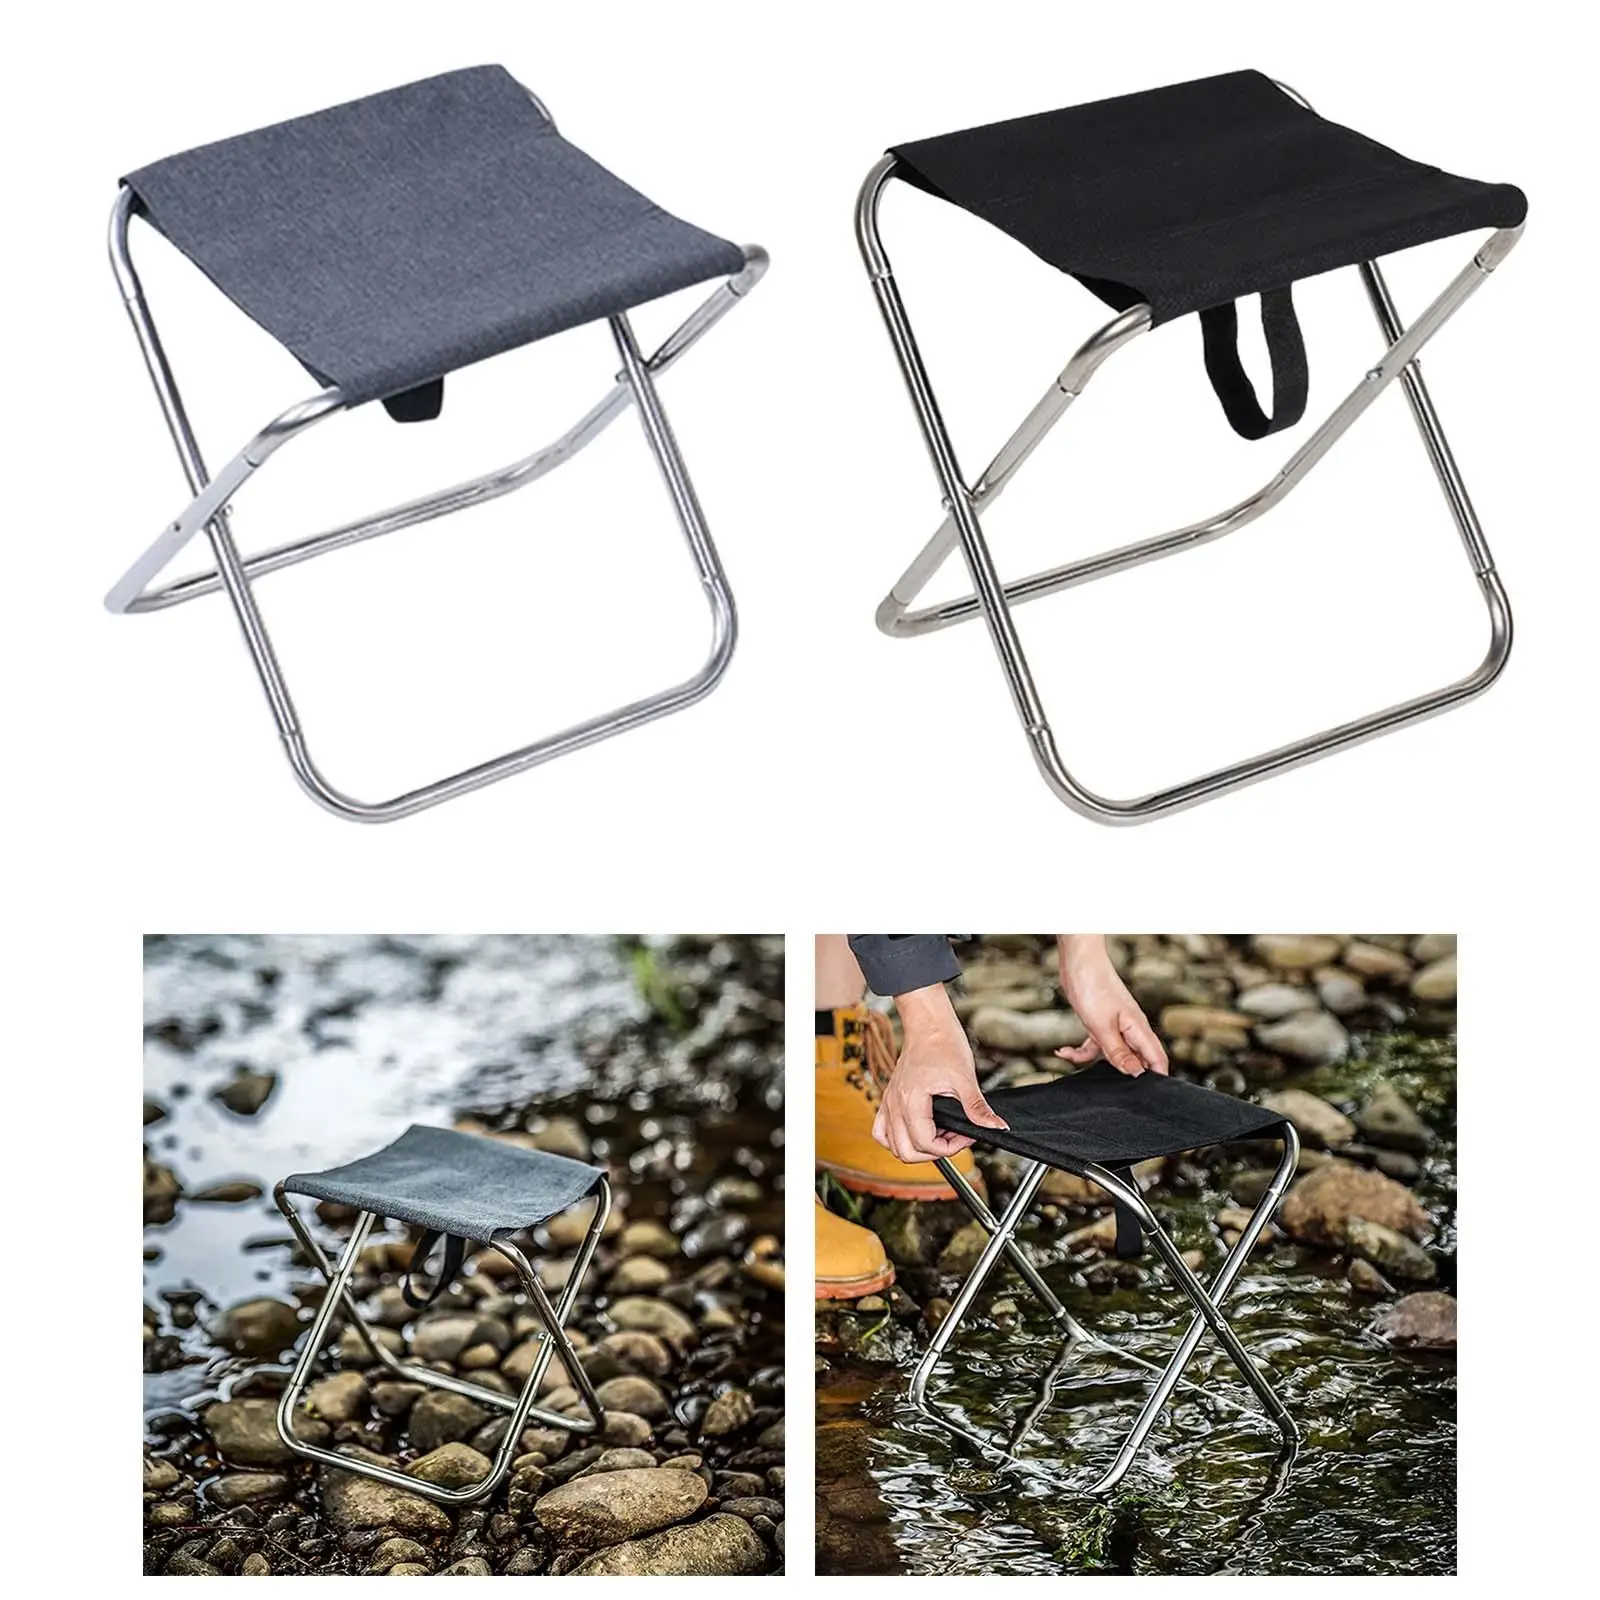 Camping Stool Folding Adults Fishing Seat Outdoor Picnic Chair Mini Portable for Backyard Concert Barbecue Party Fishing 